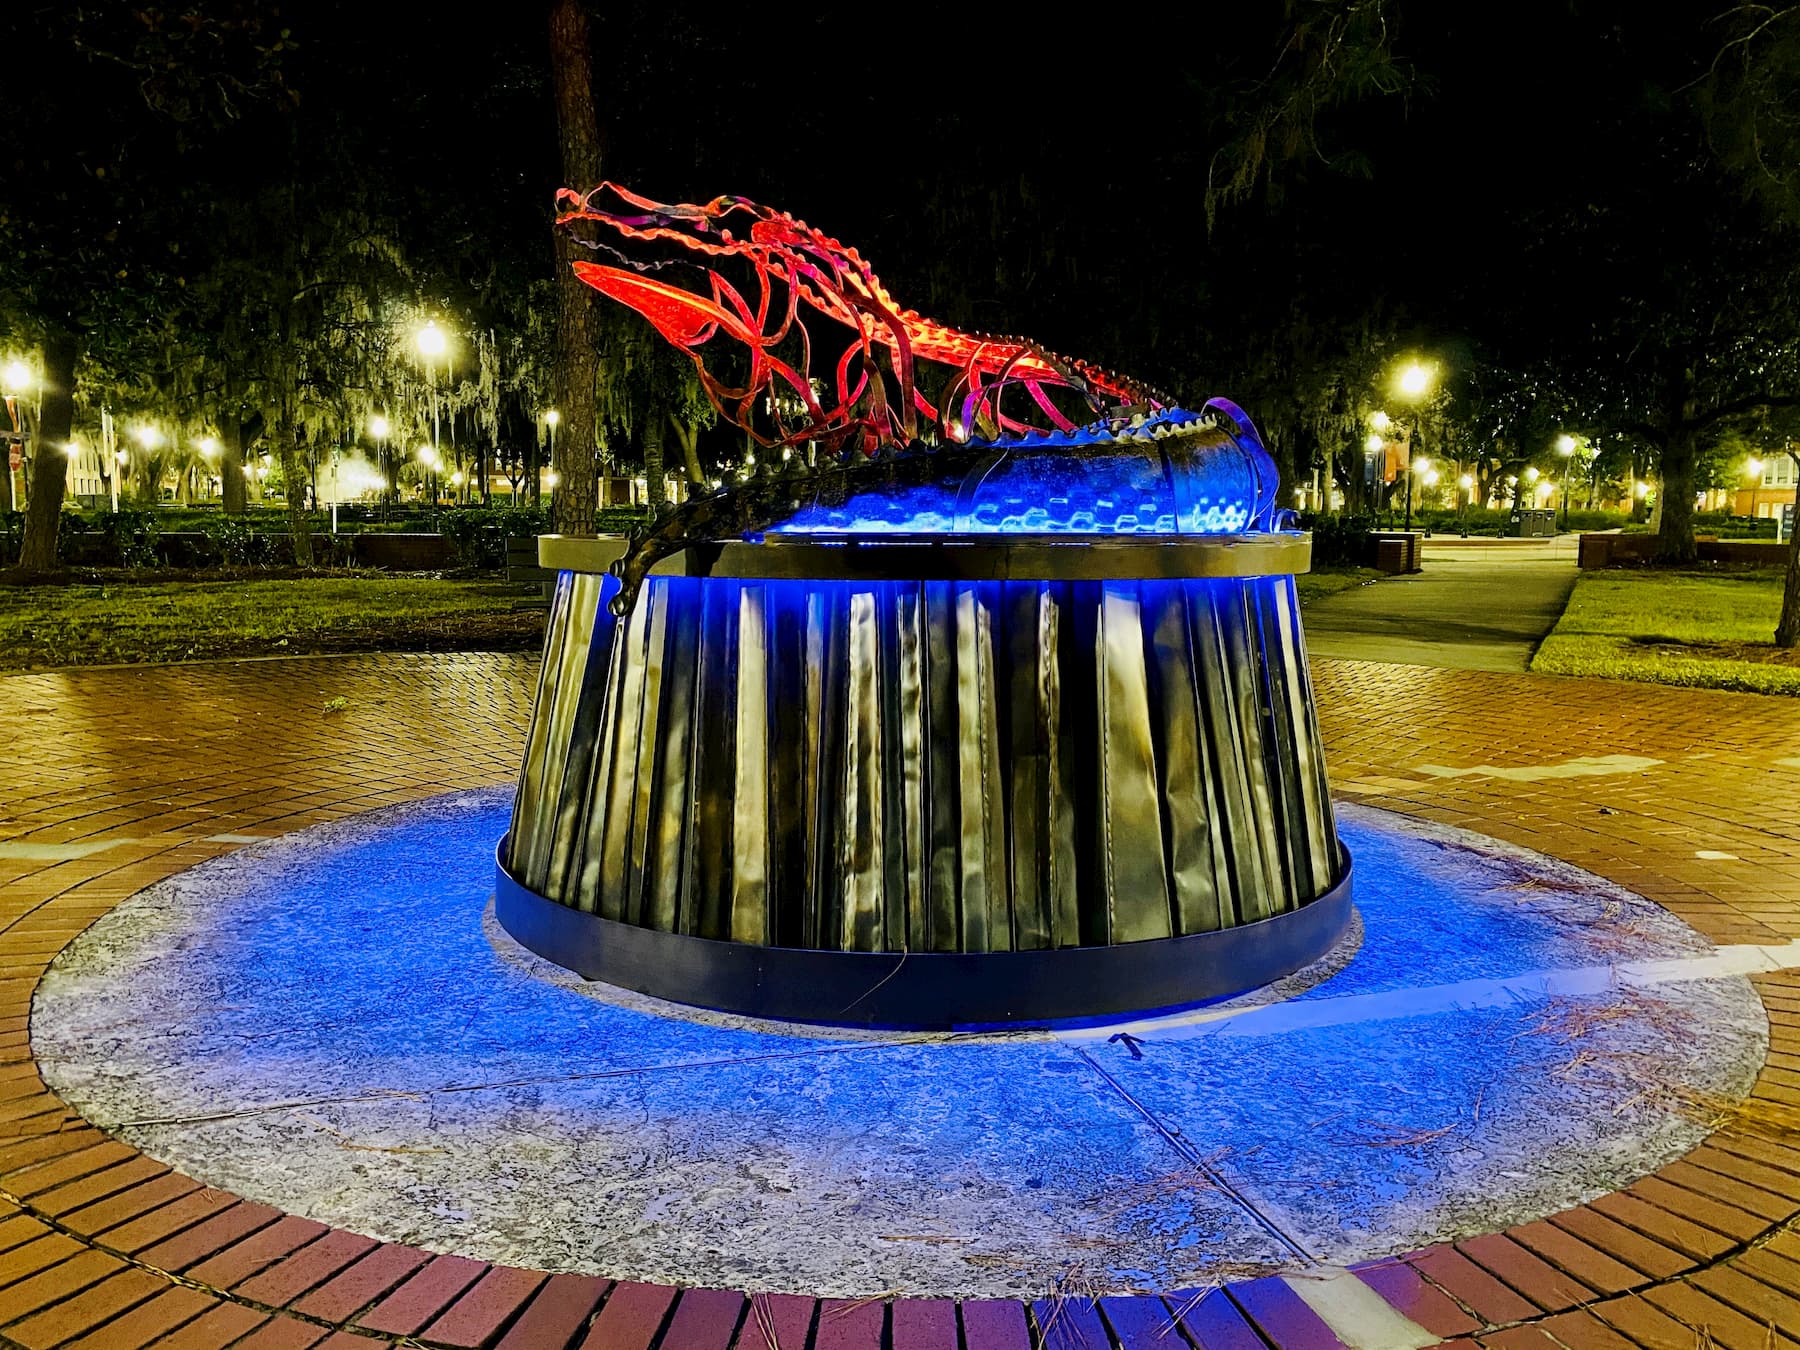 A metal statue of an alligator at night illuminated with orange and blue lights